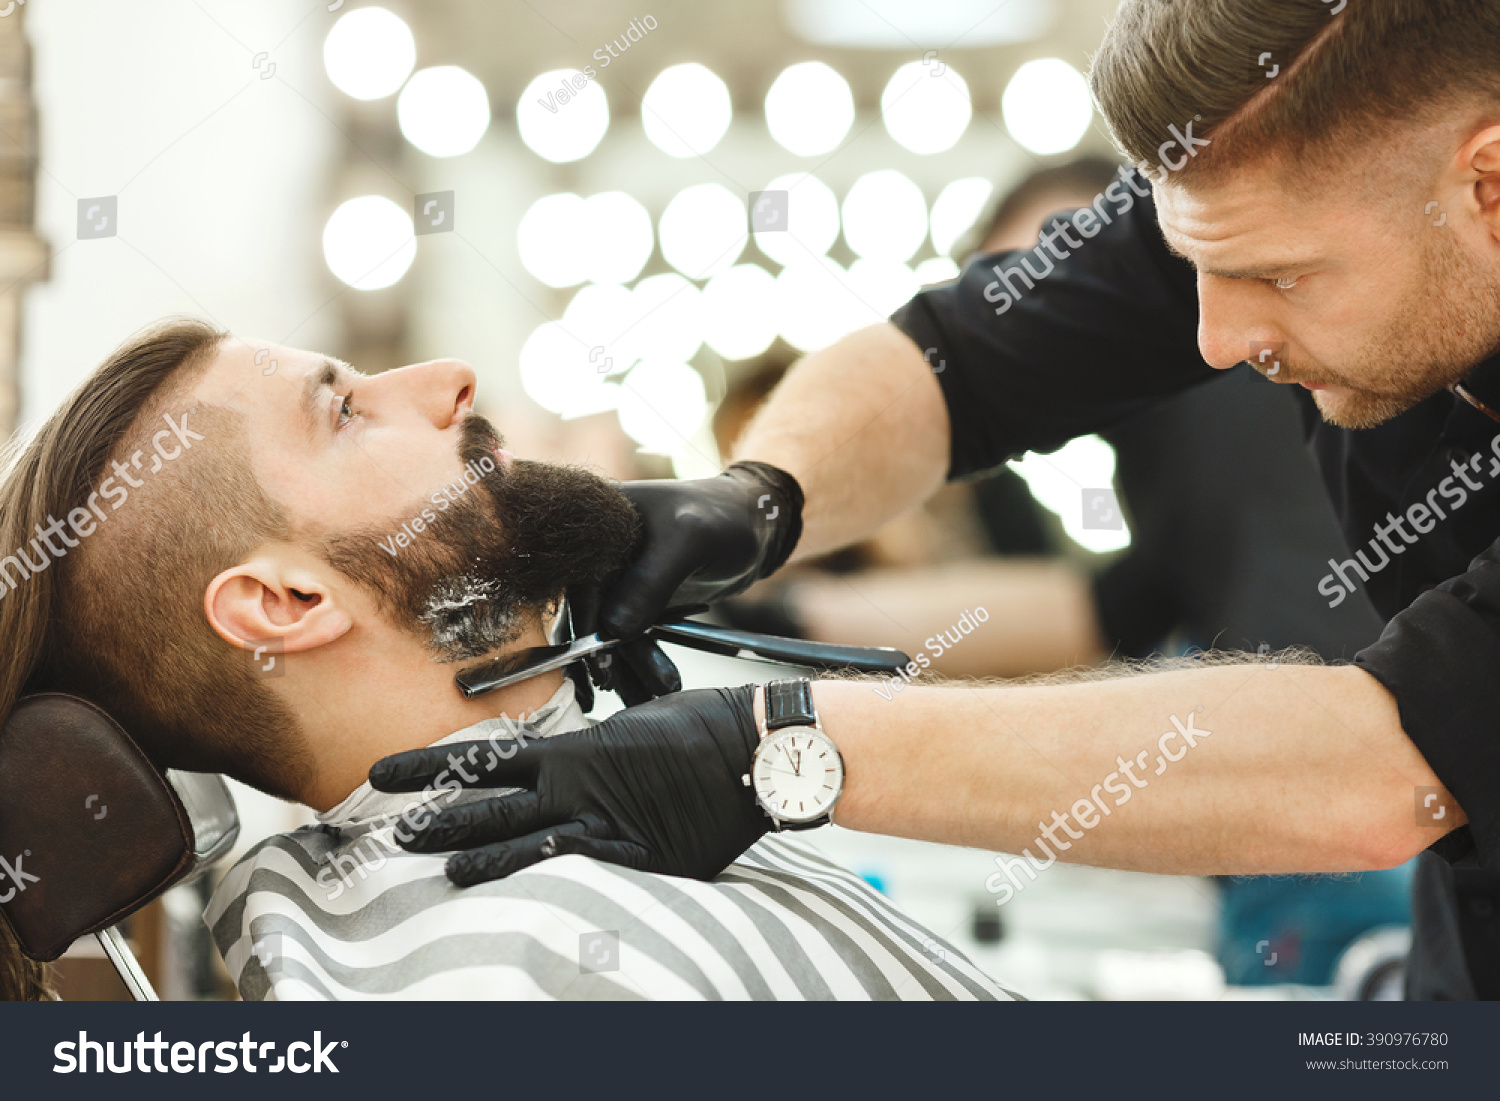 Stock Photo Attractive Barber Wearing Black Shirt Gloves And Watch Making A Beard Form With Razor For Man With 390976780 